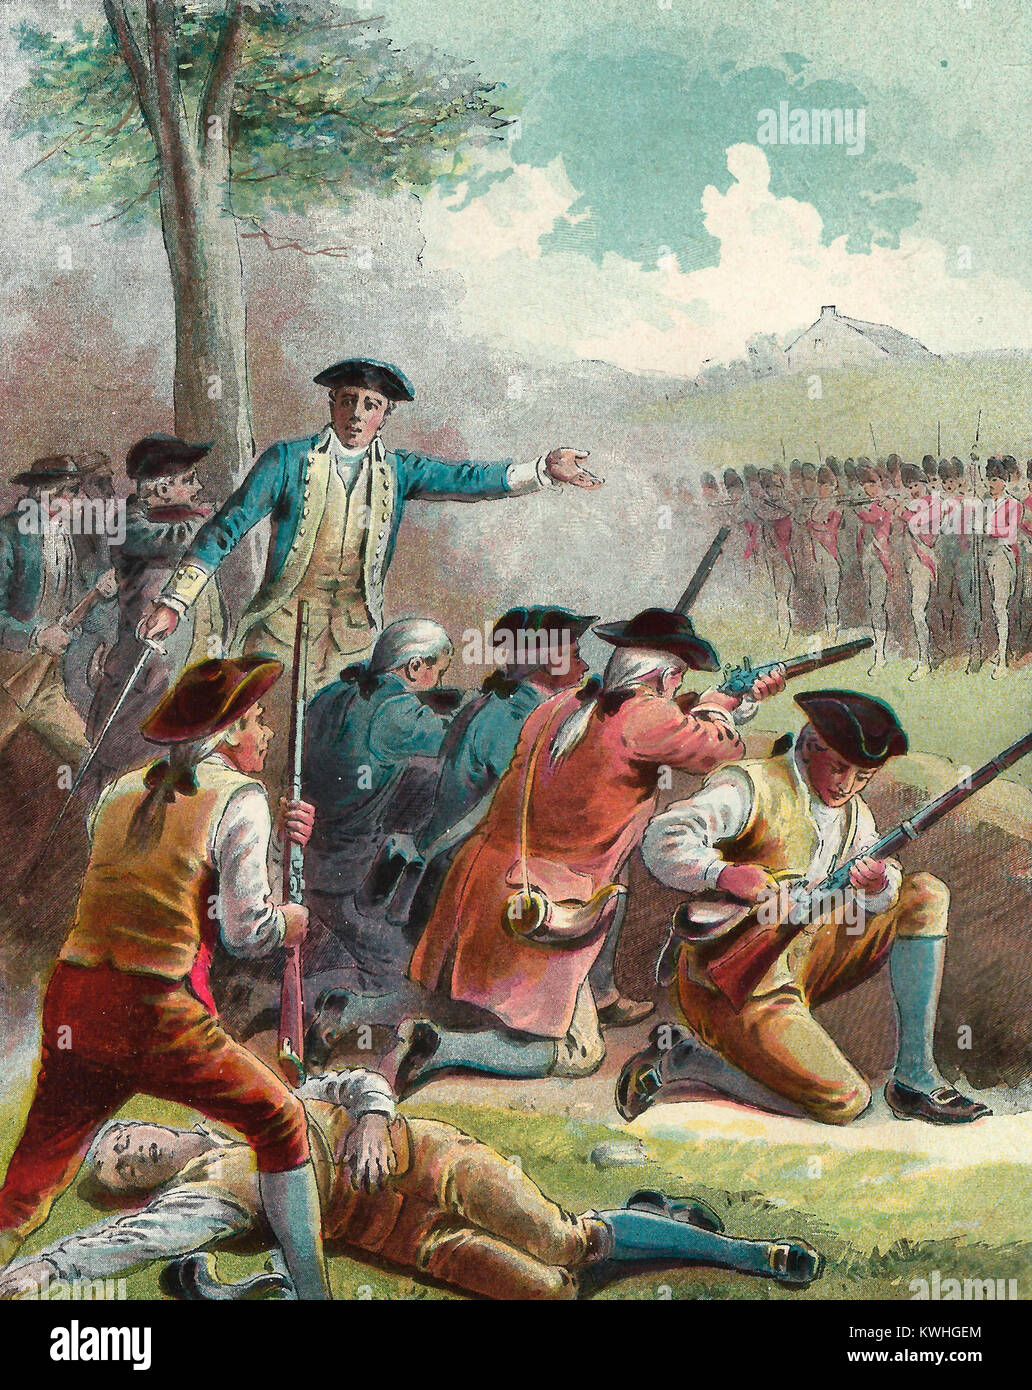 Attacking the Redcoats on their return to Boston - Battle of Concord - American Revolution, 1775 Stock Photo